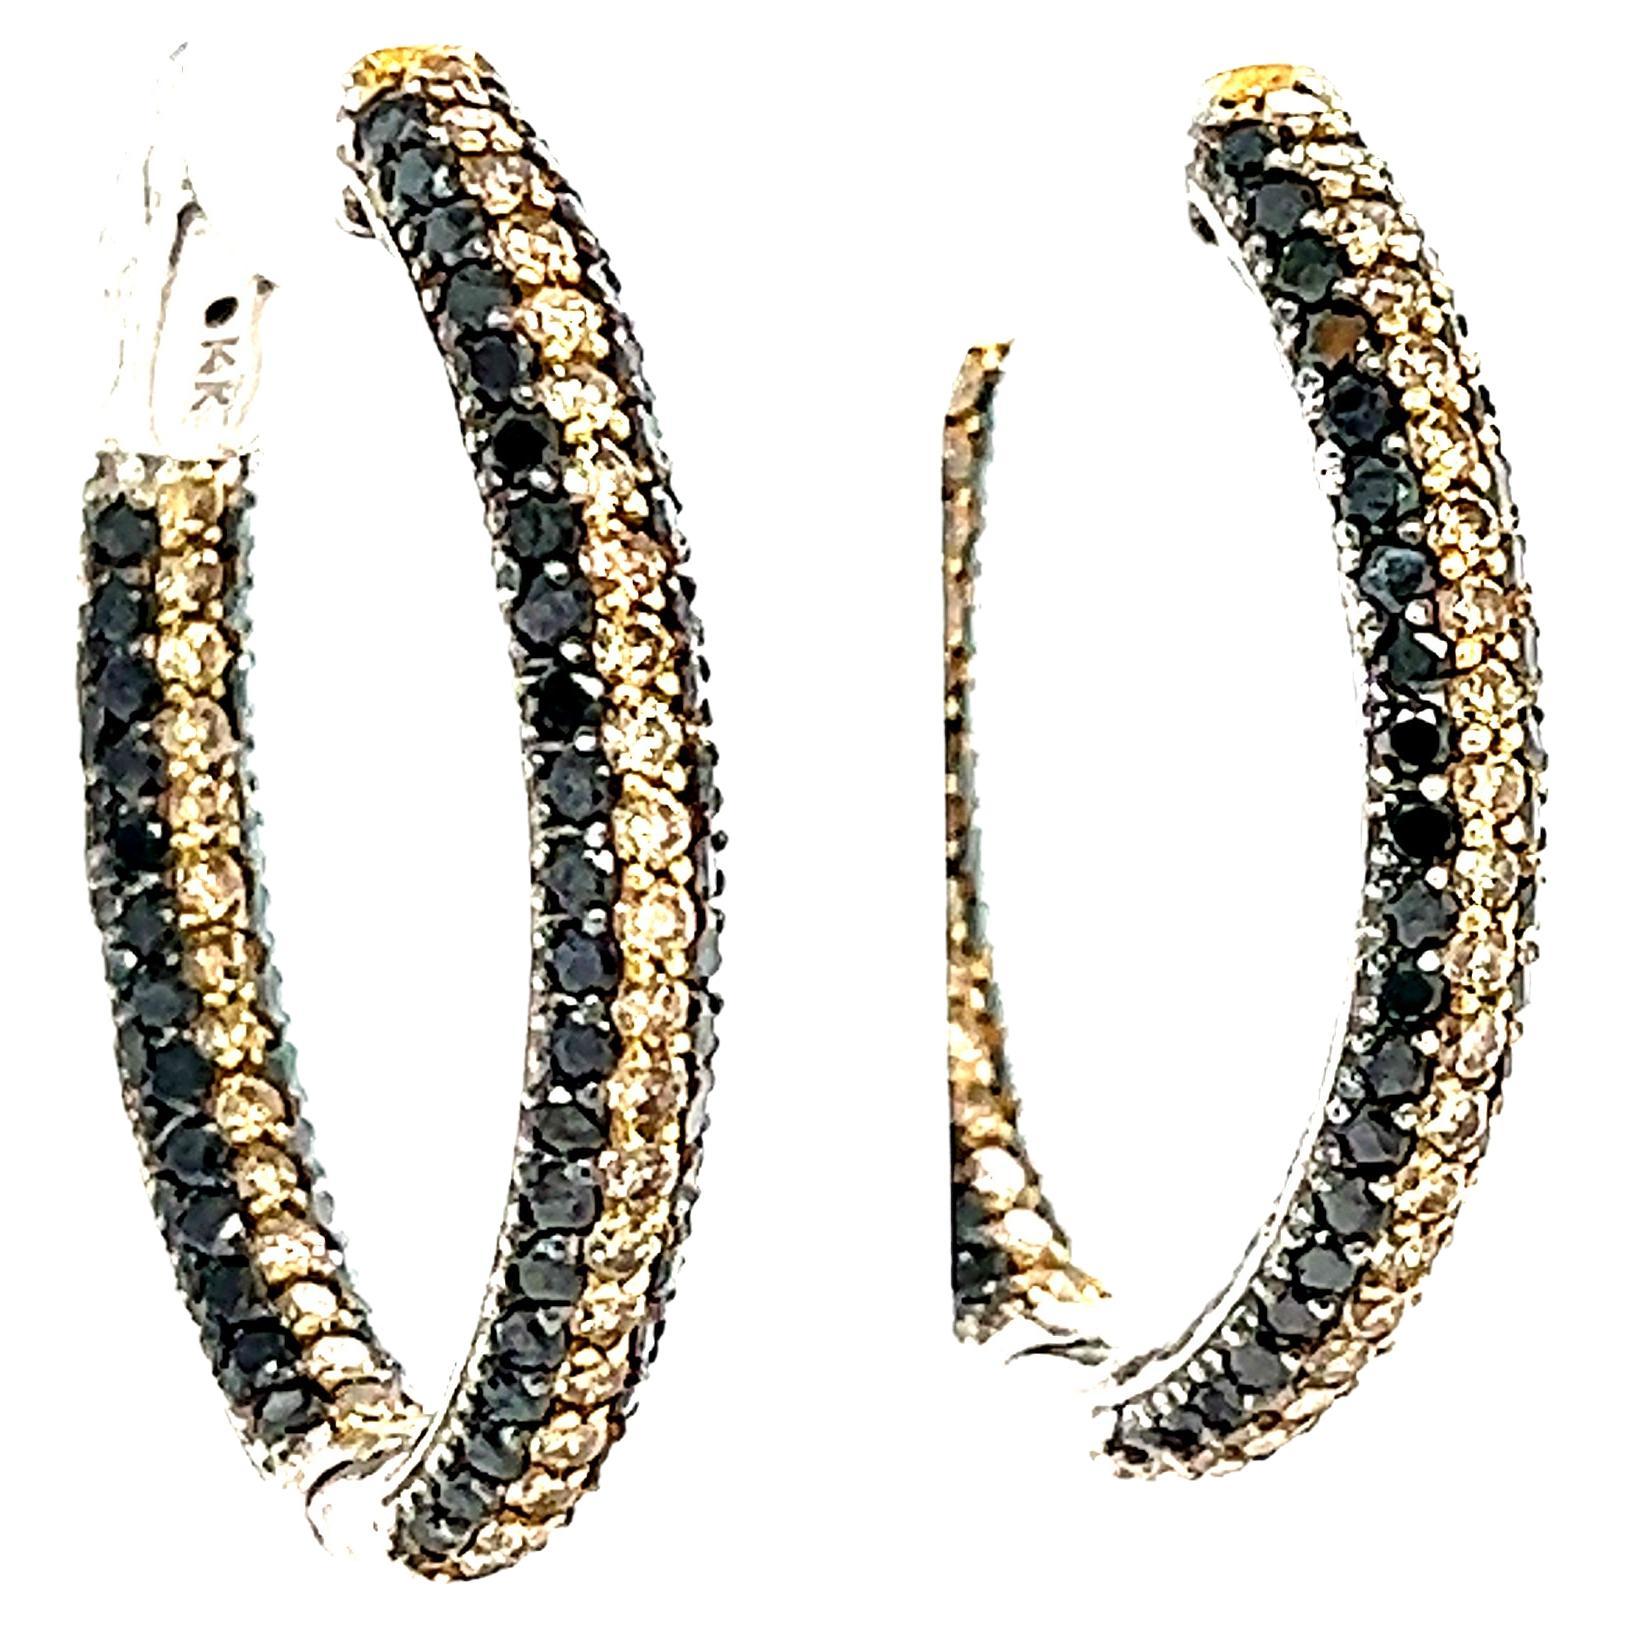 These stunning hoop earrings have Natural Round Cut Champagne Diamonds that weigh 1.41 and Natural Black Round Cut Diamonds that weigh 2.23 Carats. The total carat weight of the hoops are 3.64 Carats. The hoops are just under 1 inch wide and just